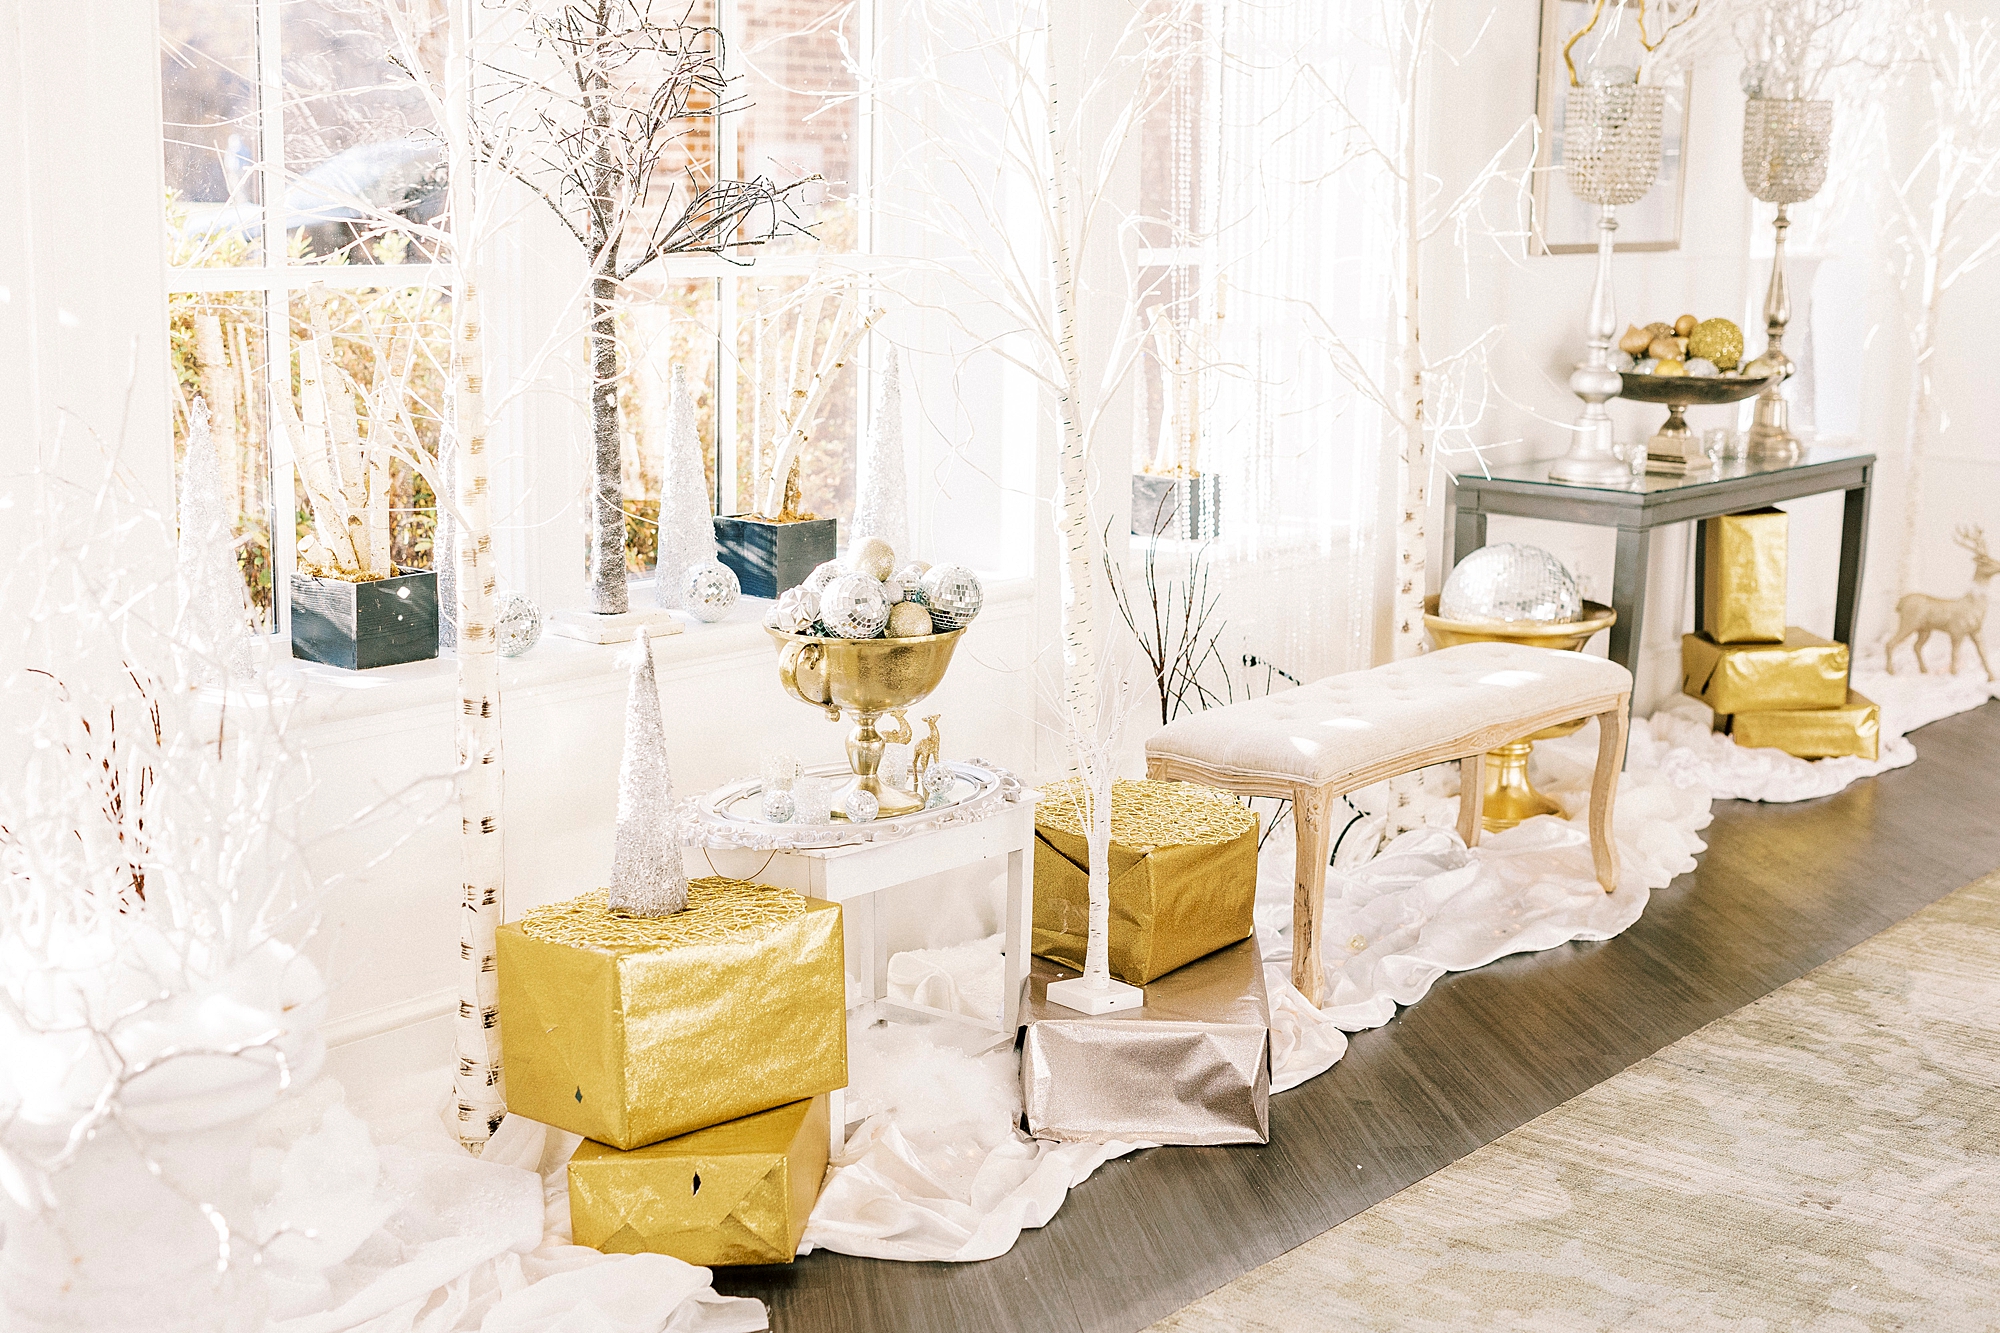 Winter Wonderland wedding at River Run Country Club seating area with gold accents 